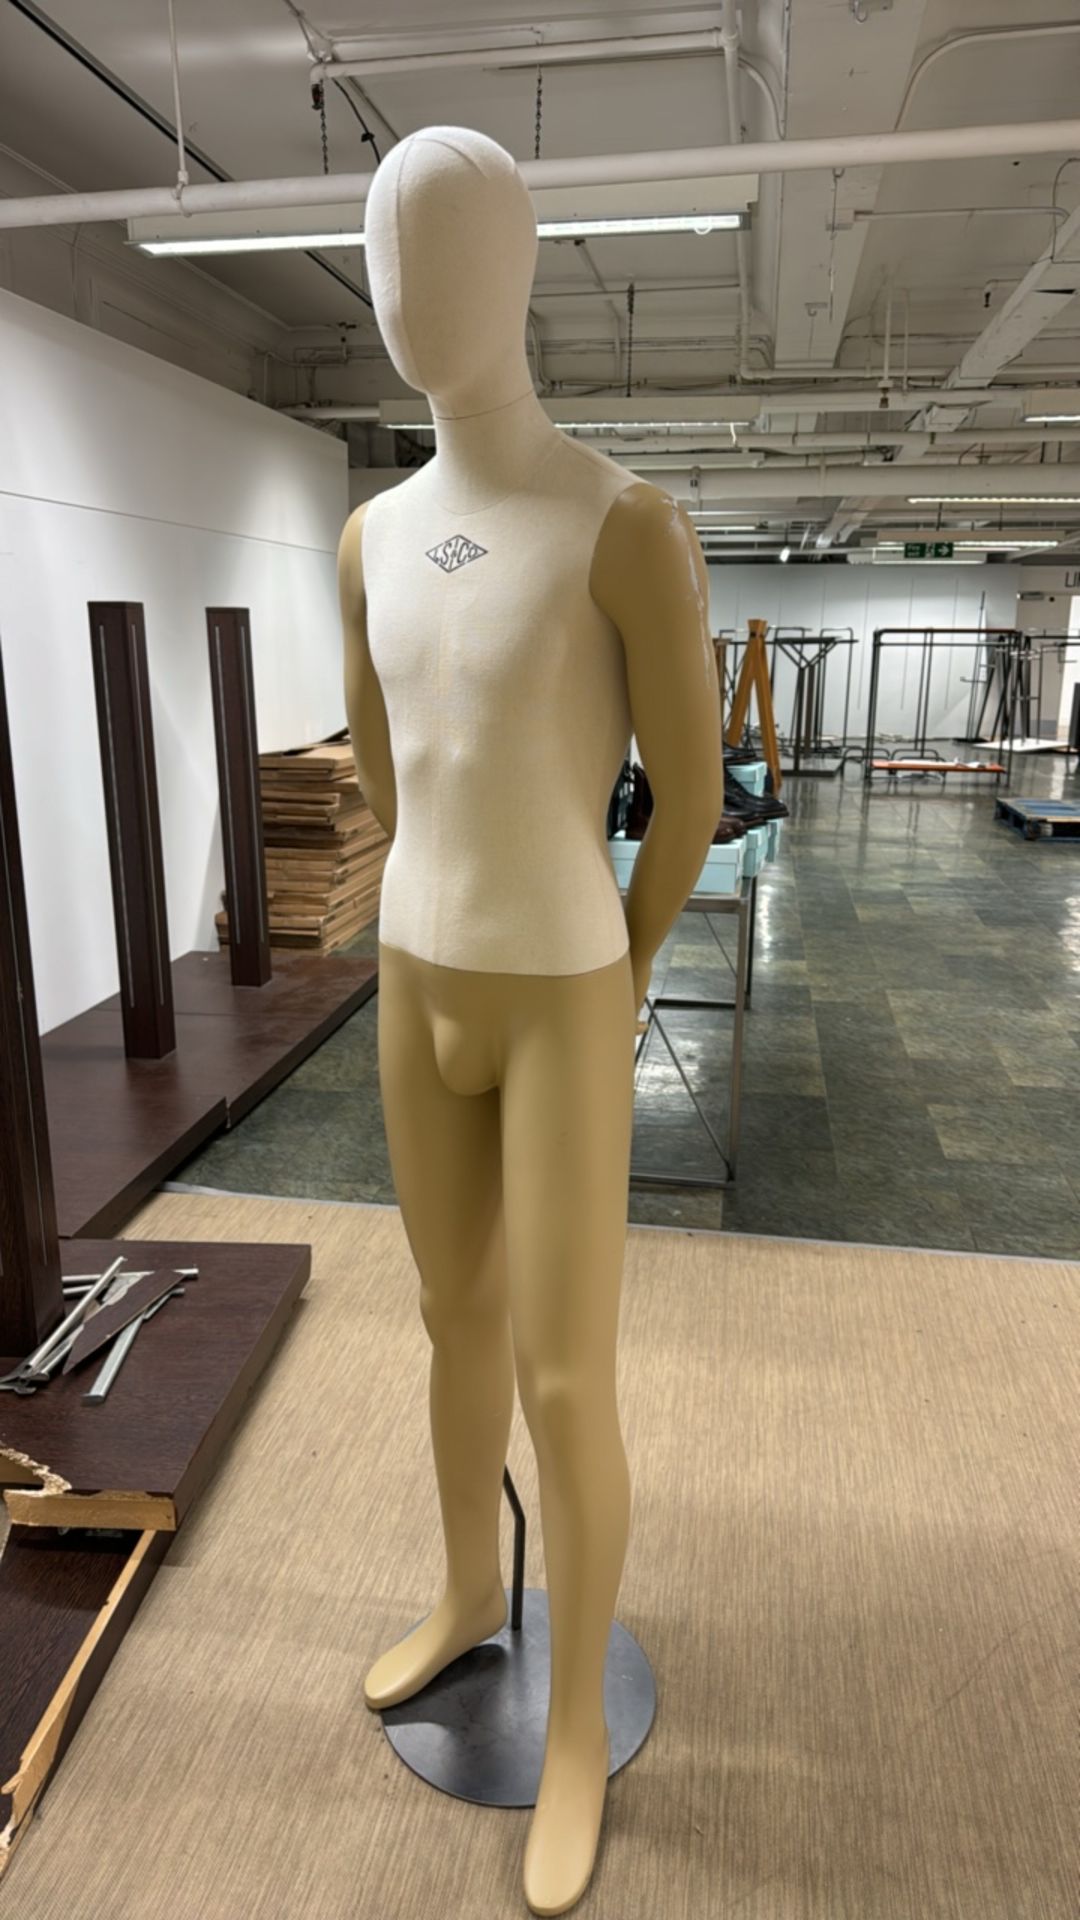 LS&Co Mannequin - Image 2 of 3